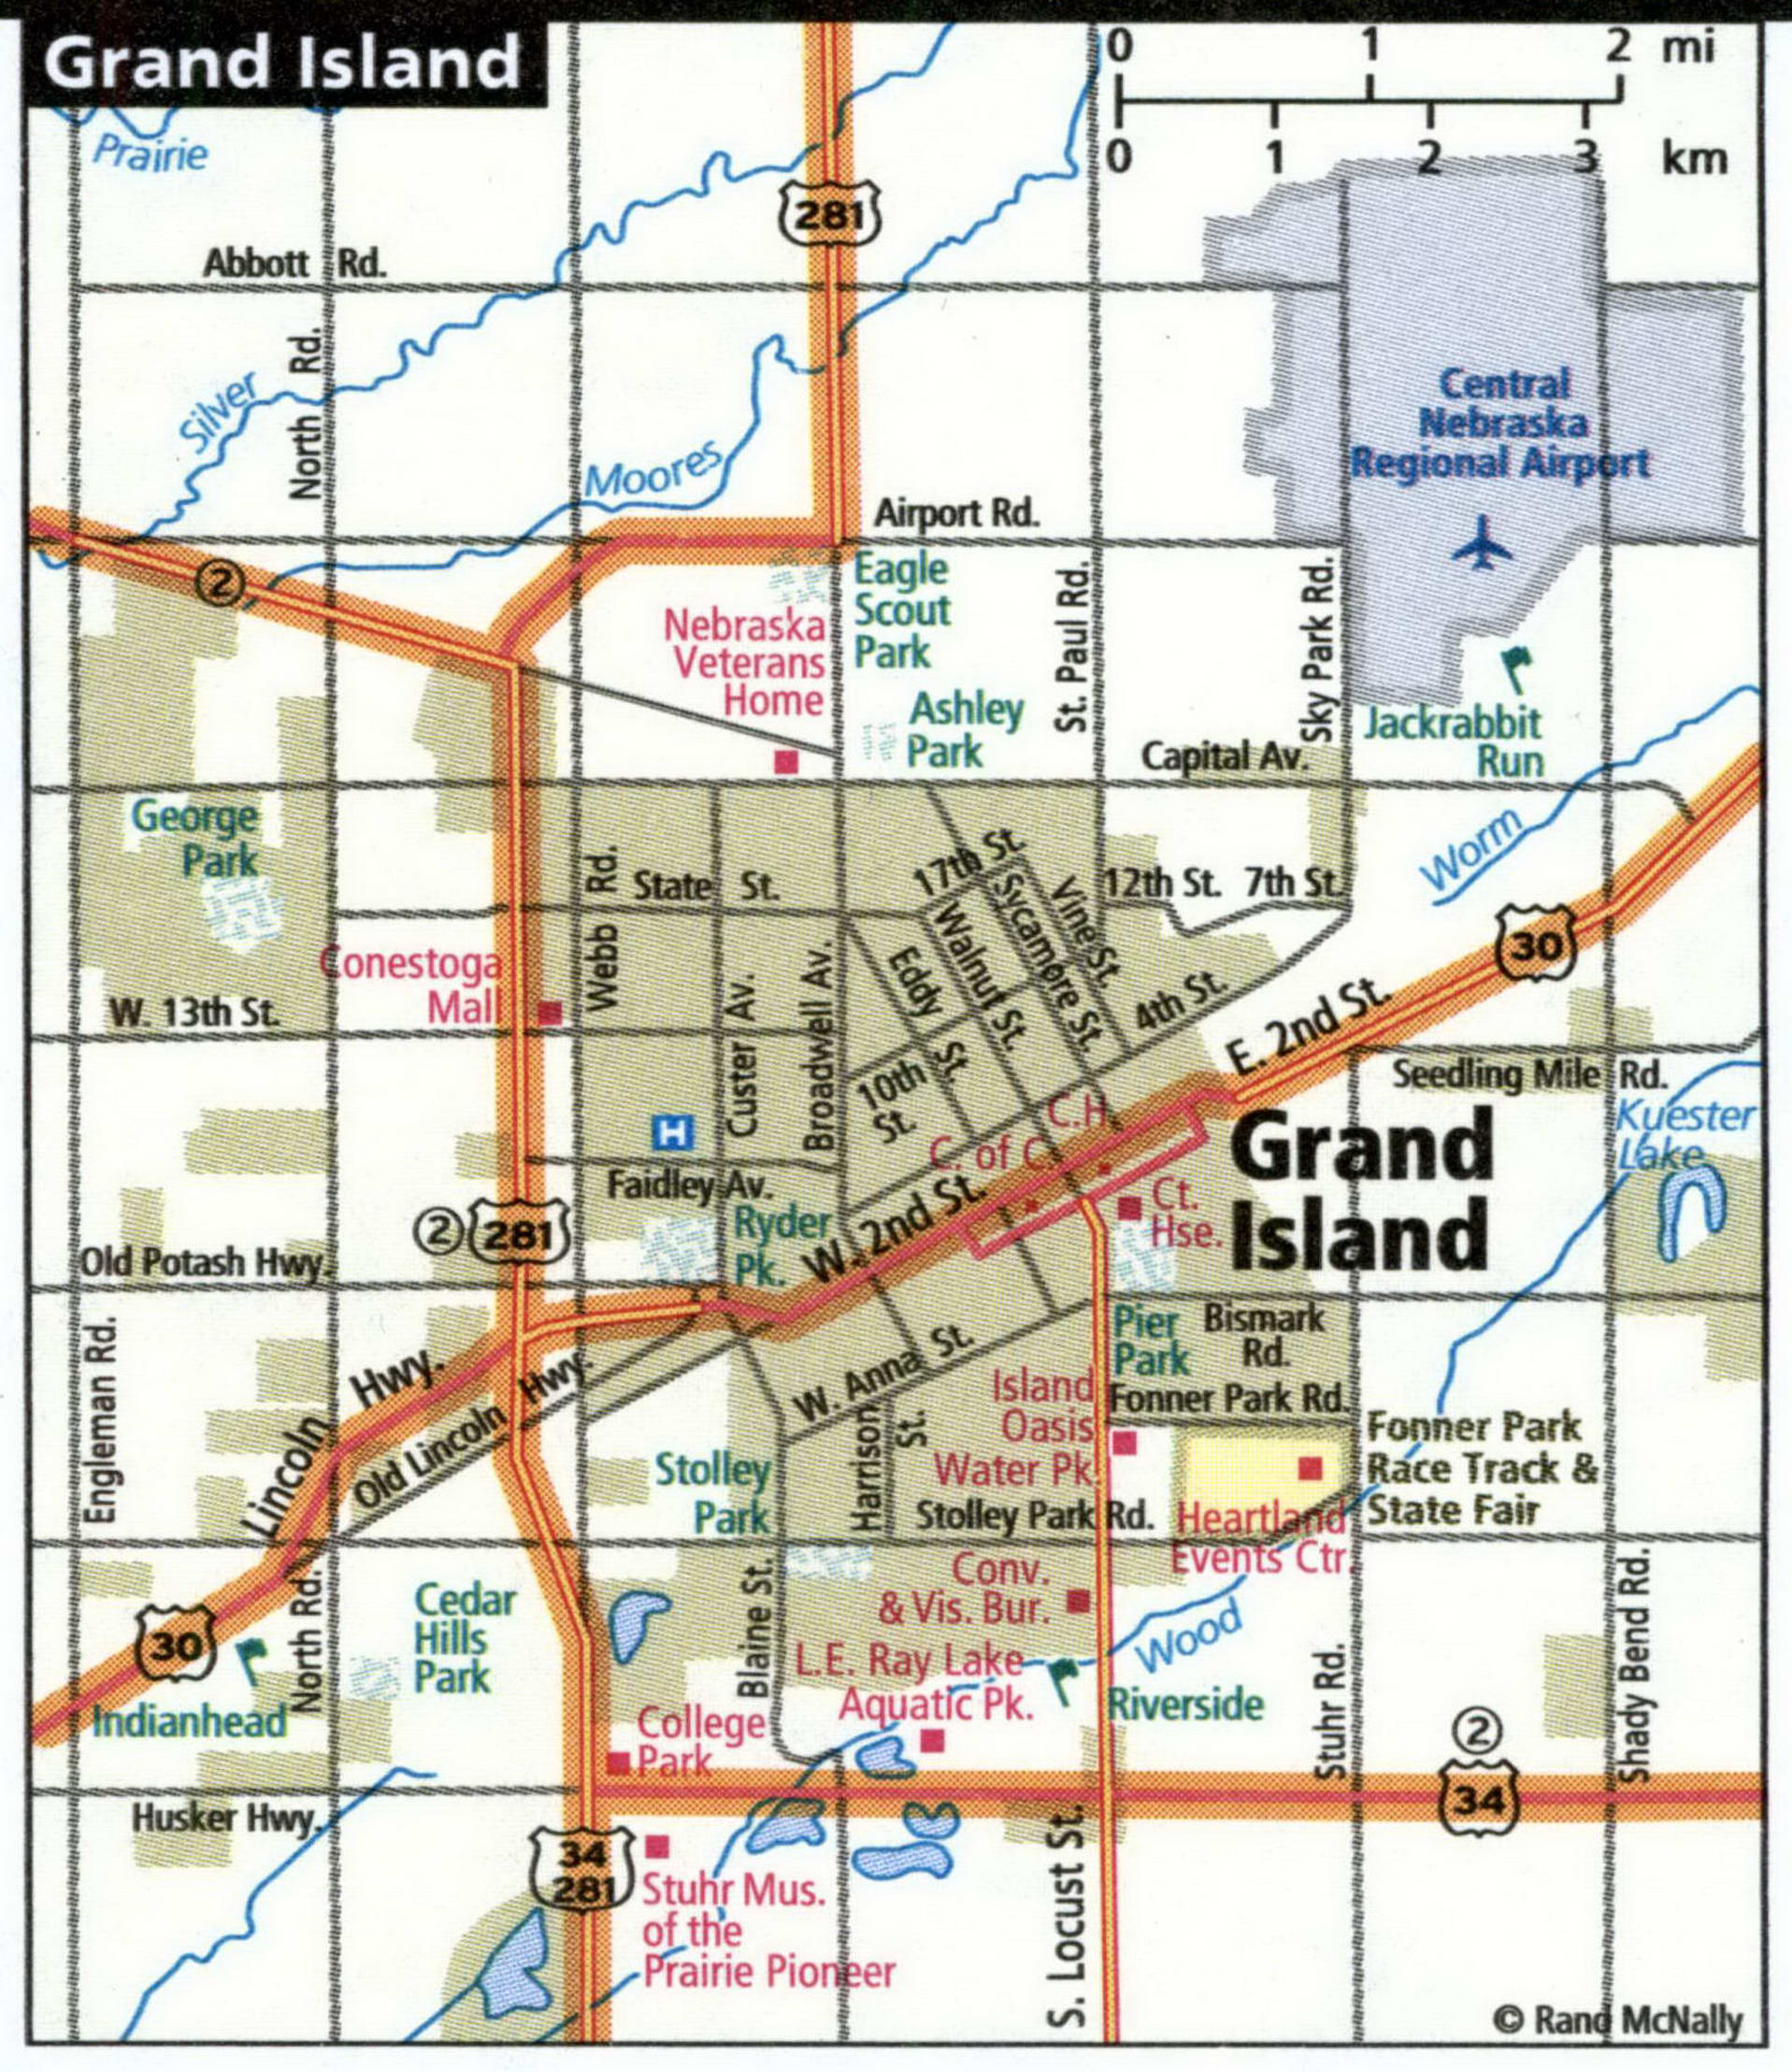 Grand Island map for truckers